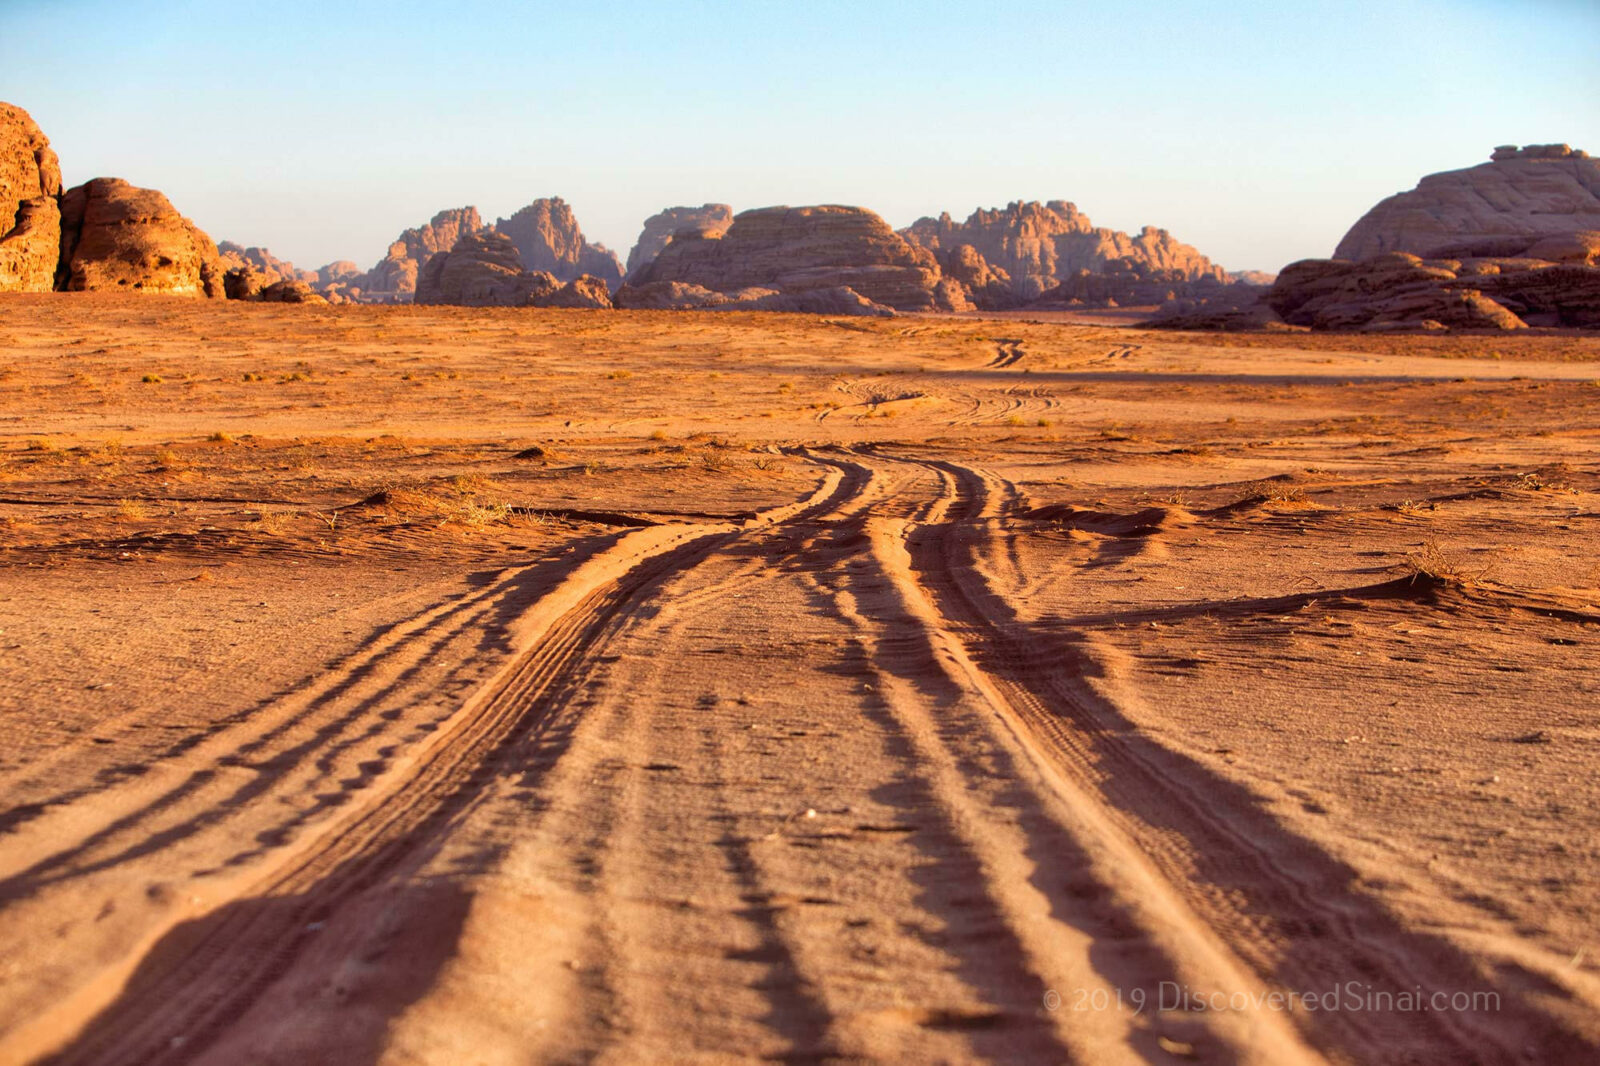 The red sandstone mesas of the Hisma desert trade route to the Promised Land.